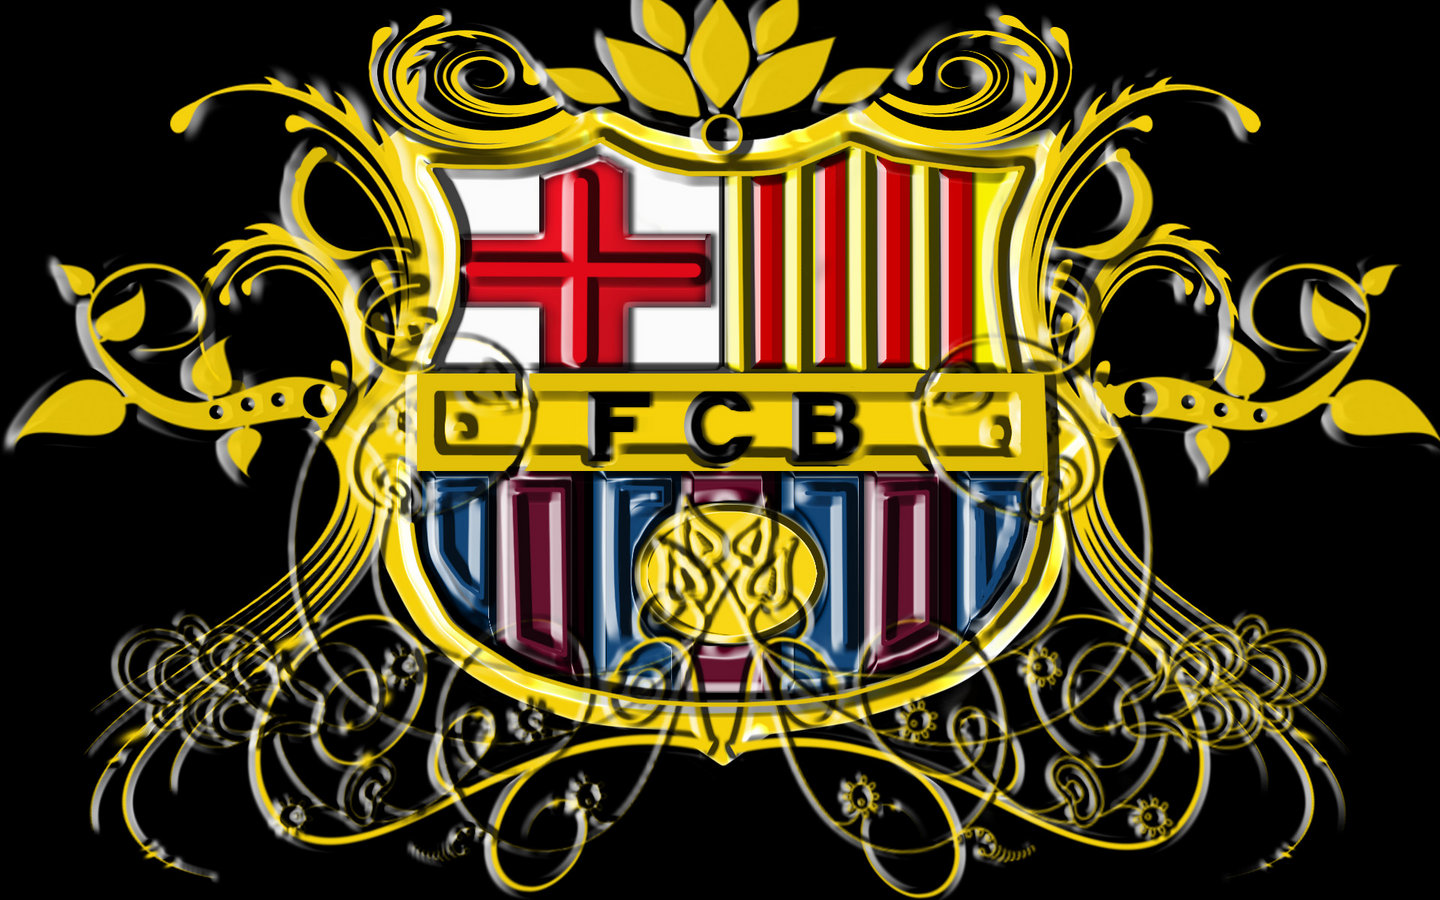 All About Japanese Fcb Barcelona Logos